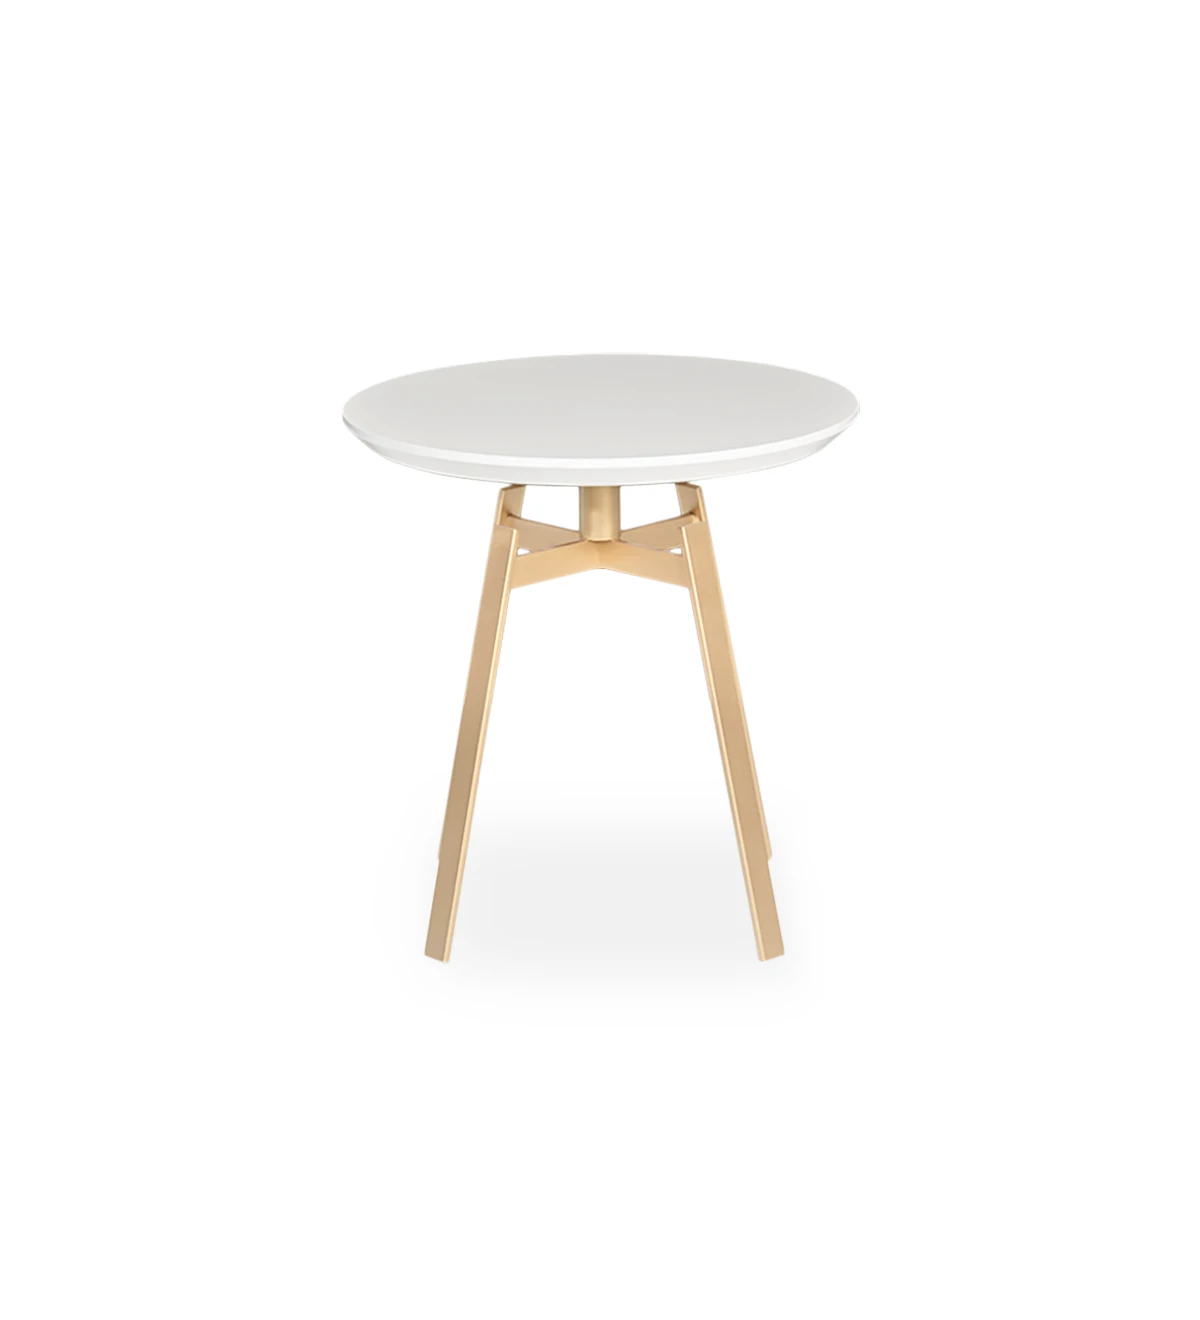 Round side table, with pearl lacquered top and gold lacquered metallic foot.